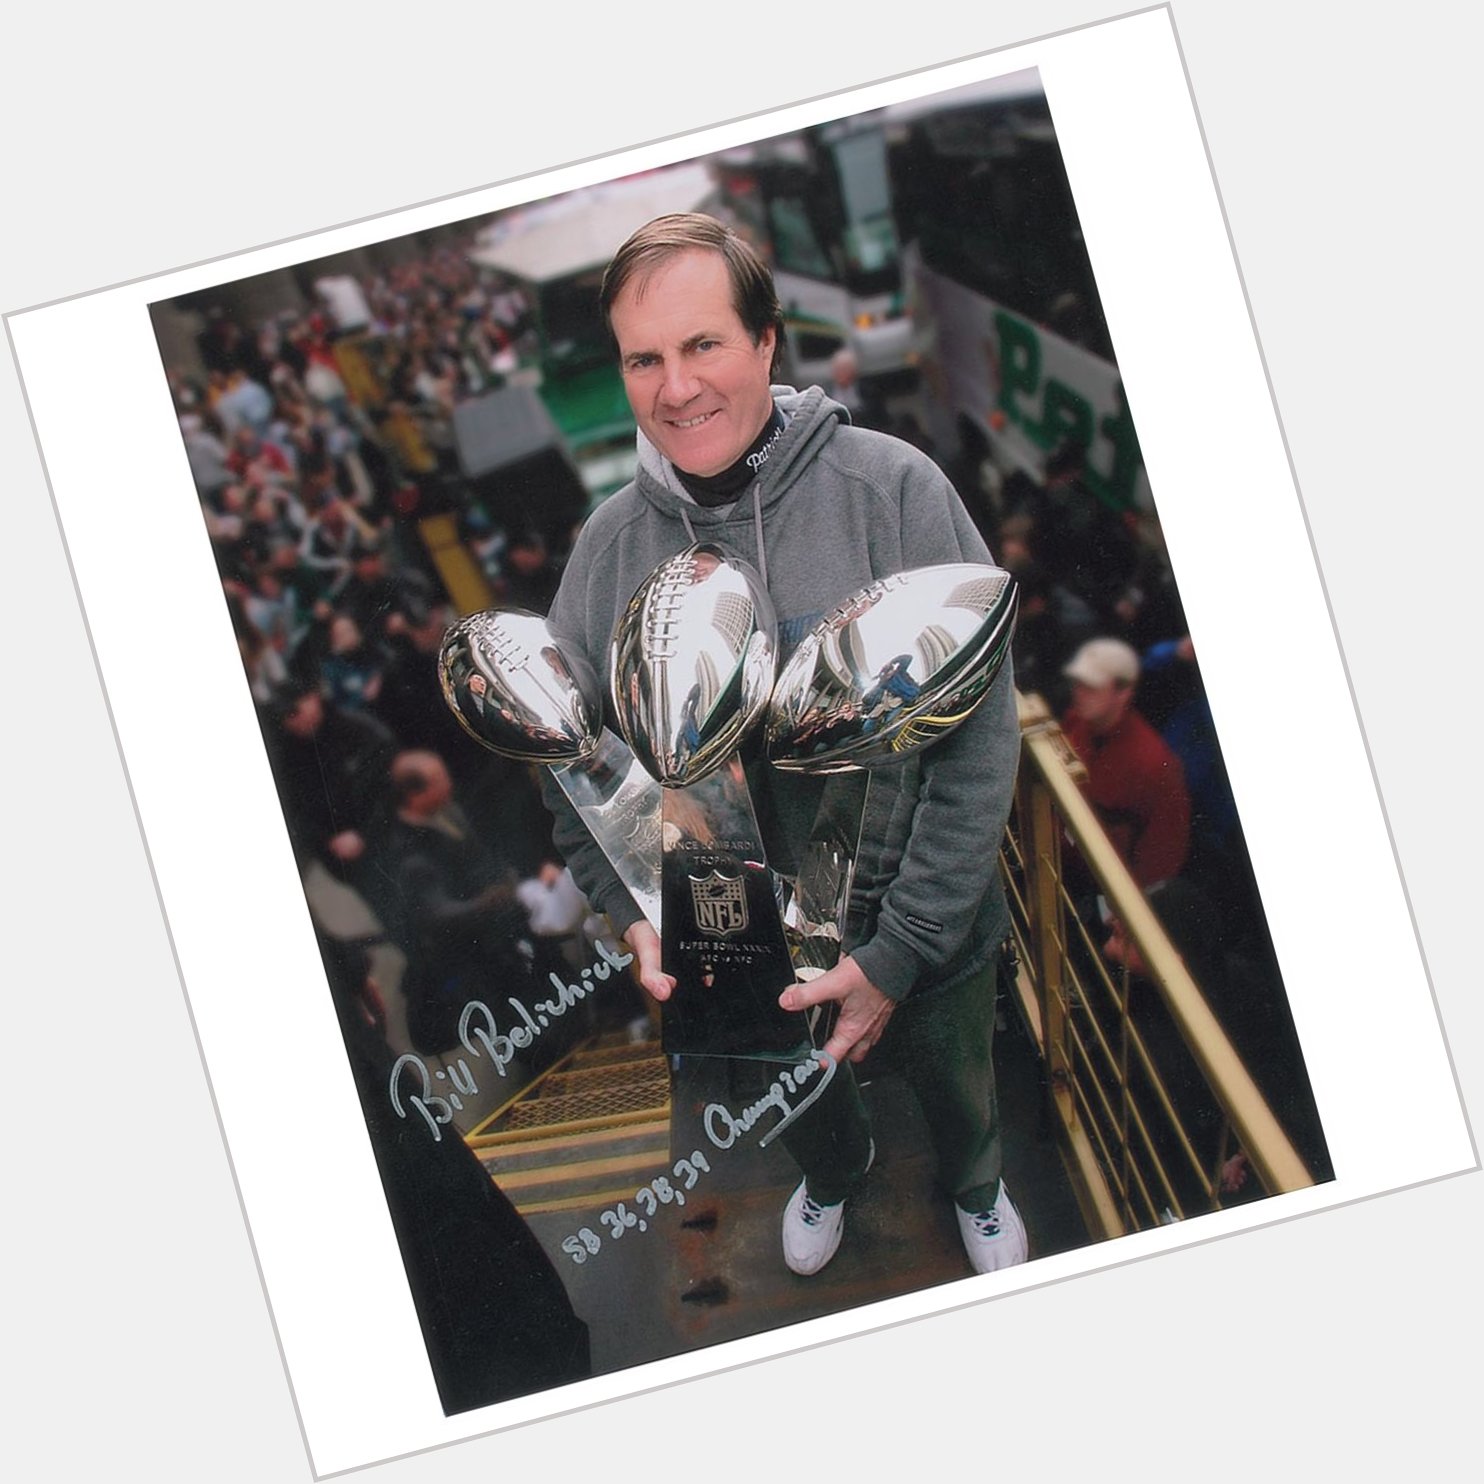 What can\t he do? Happy 65th birthday to the legend, Bill Belichick 